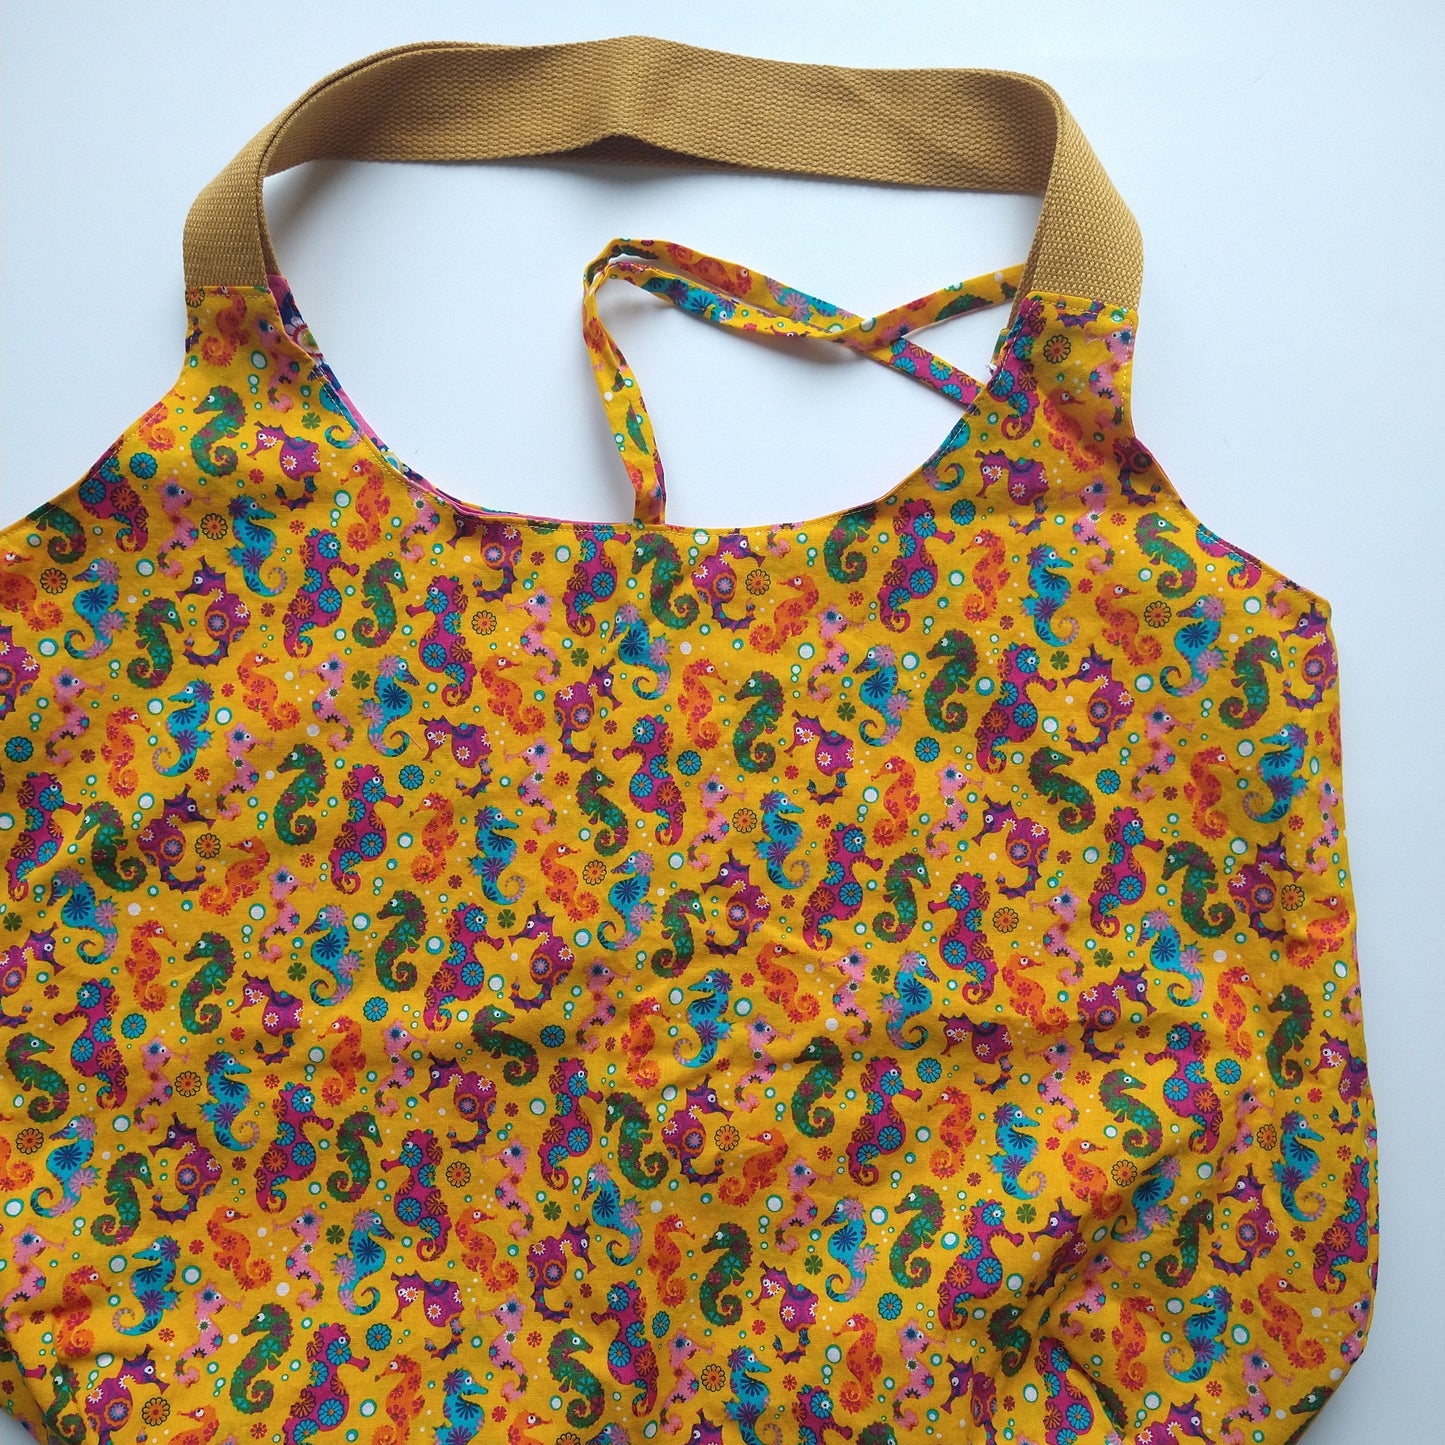 Shopping/Beach bag, reversible, size large, yellow seahorses (Handmade in Canada)